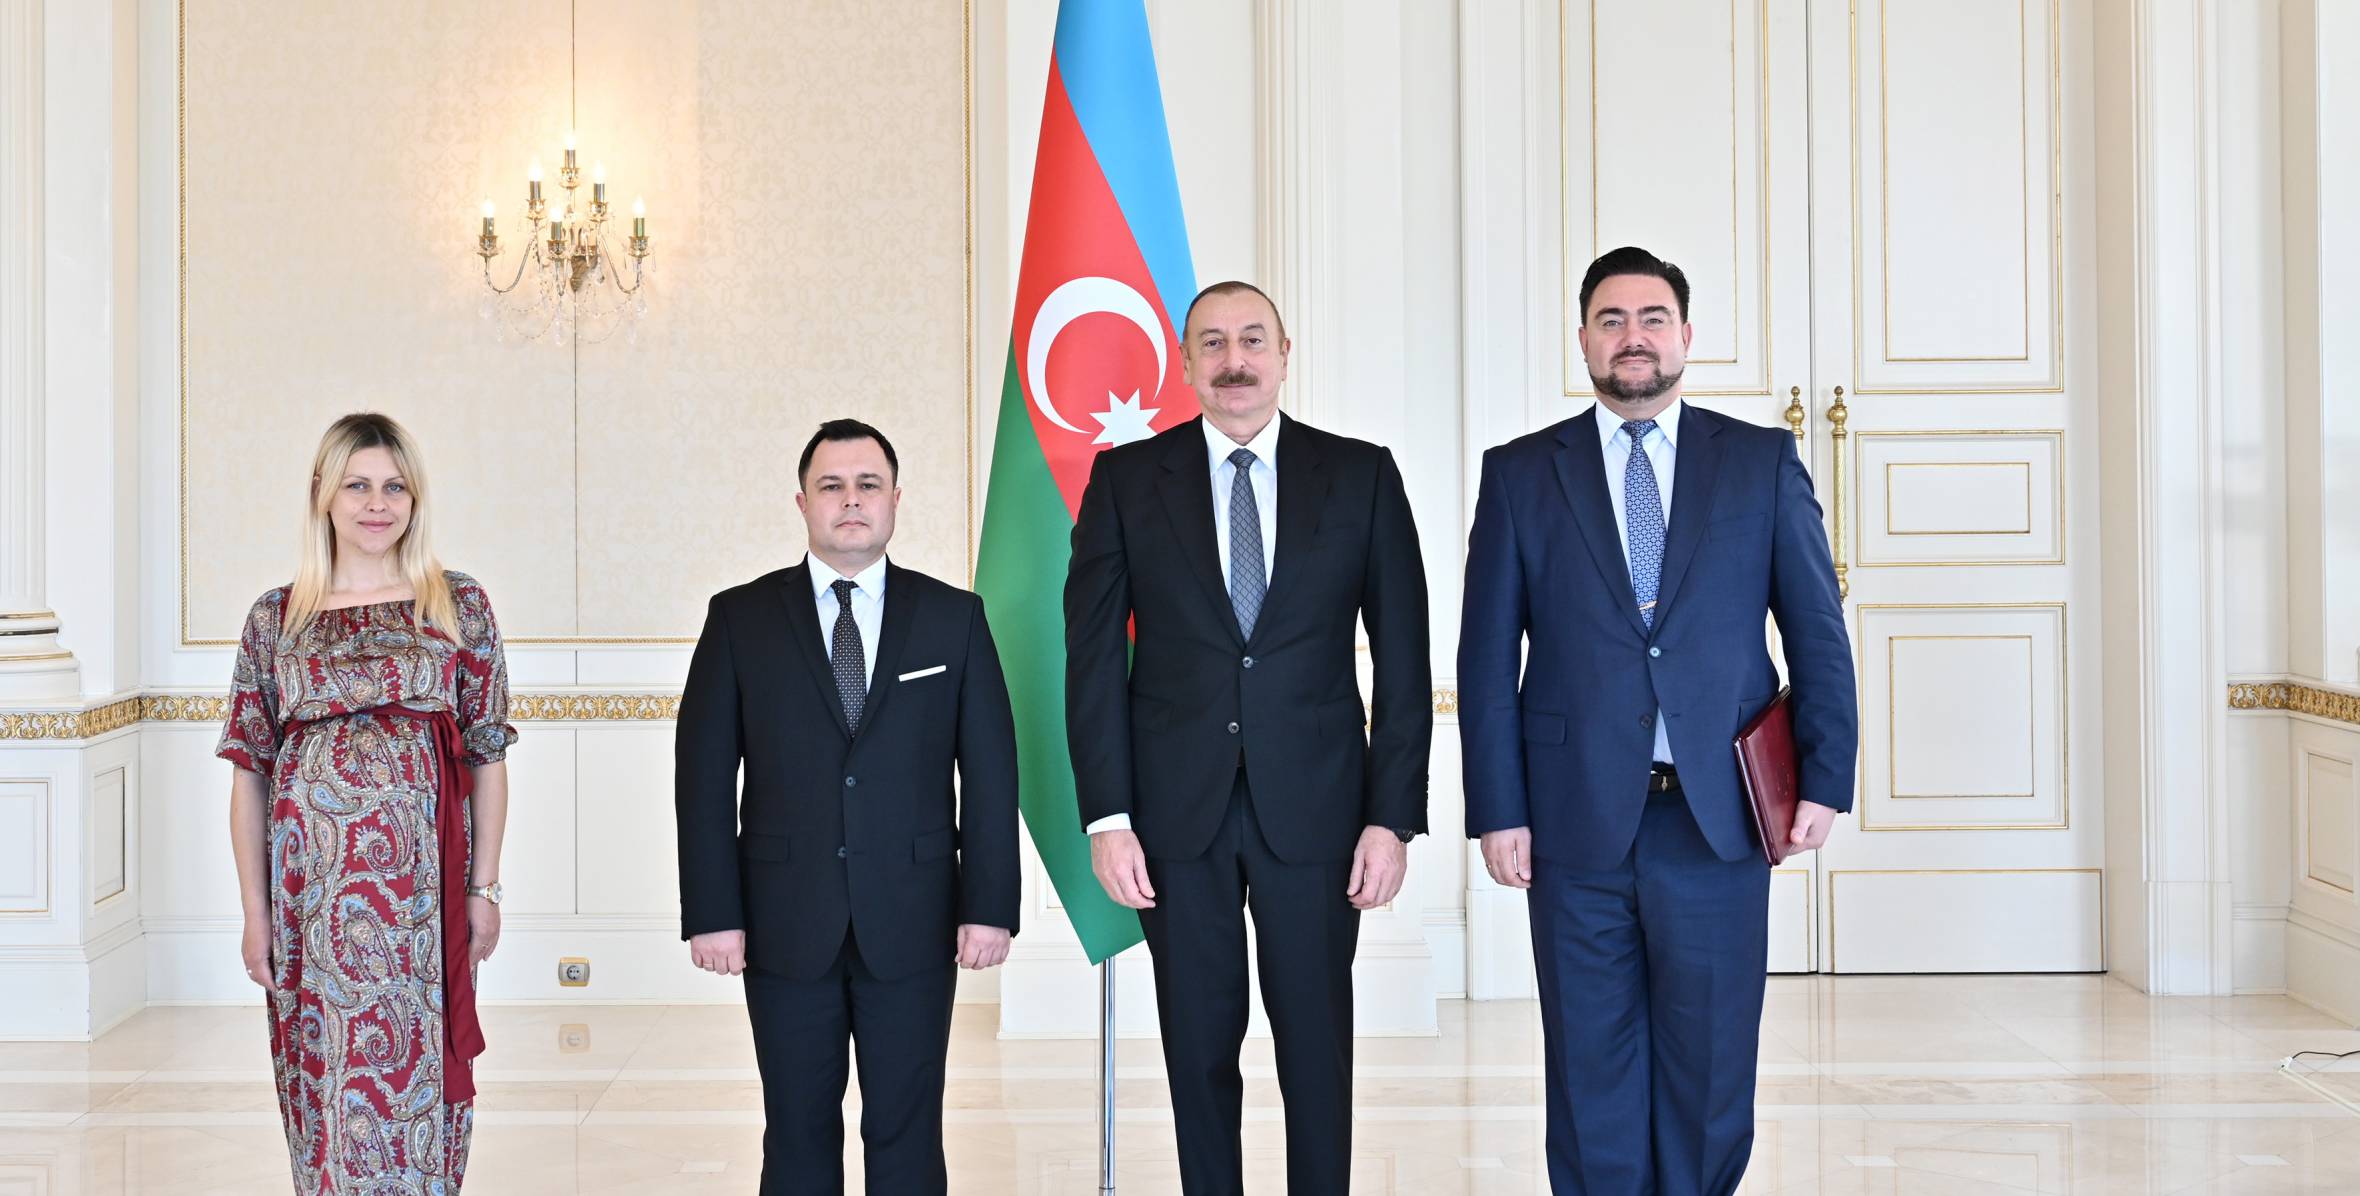 Ilham Aliyev received the credentials of incoming ambassador of Moldova